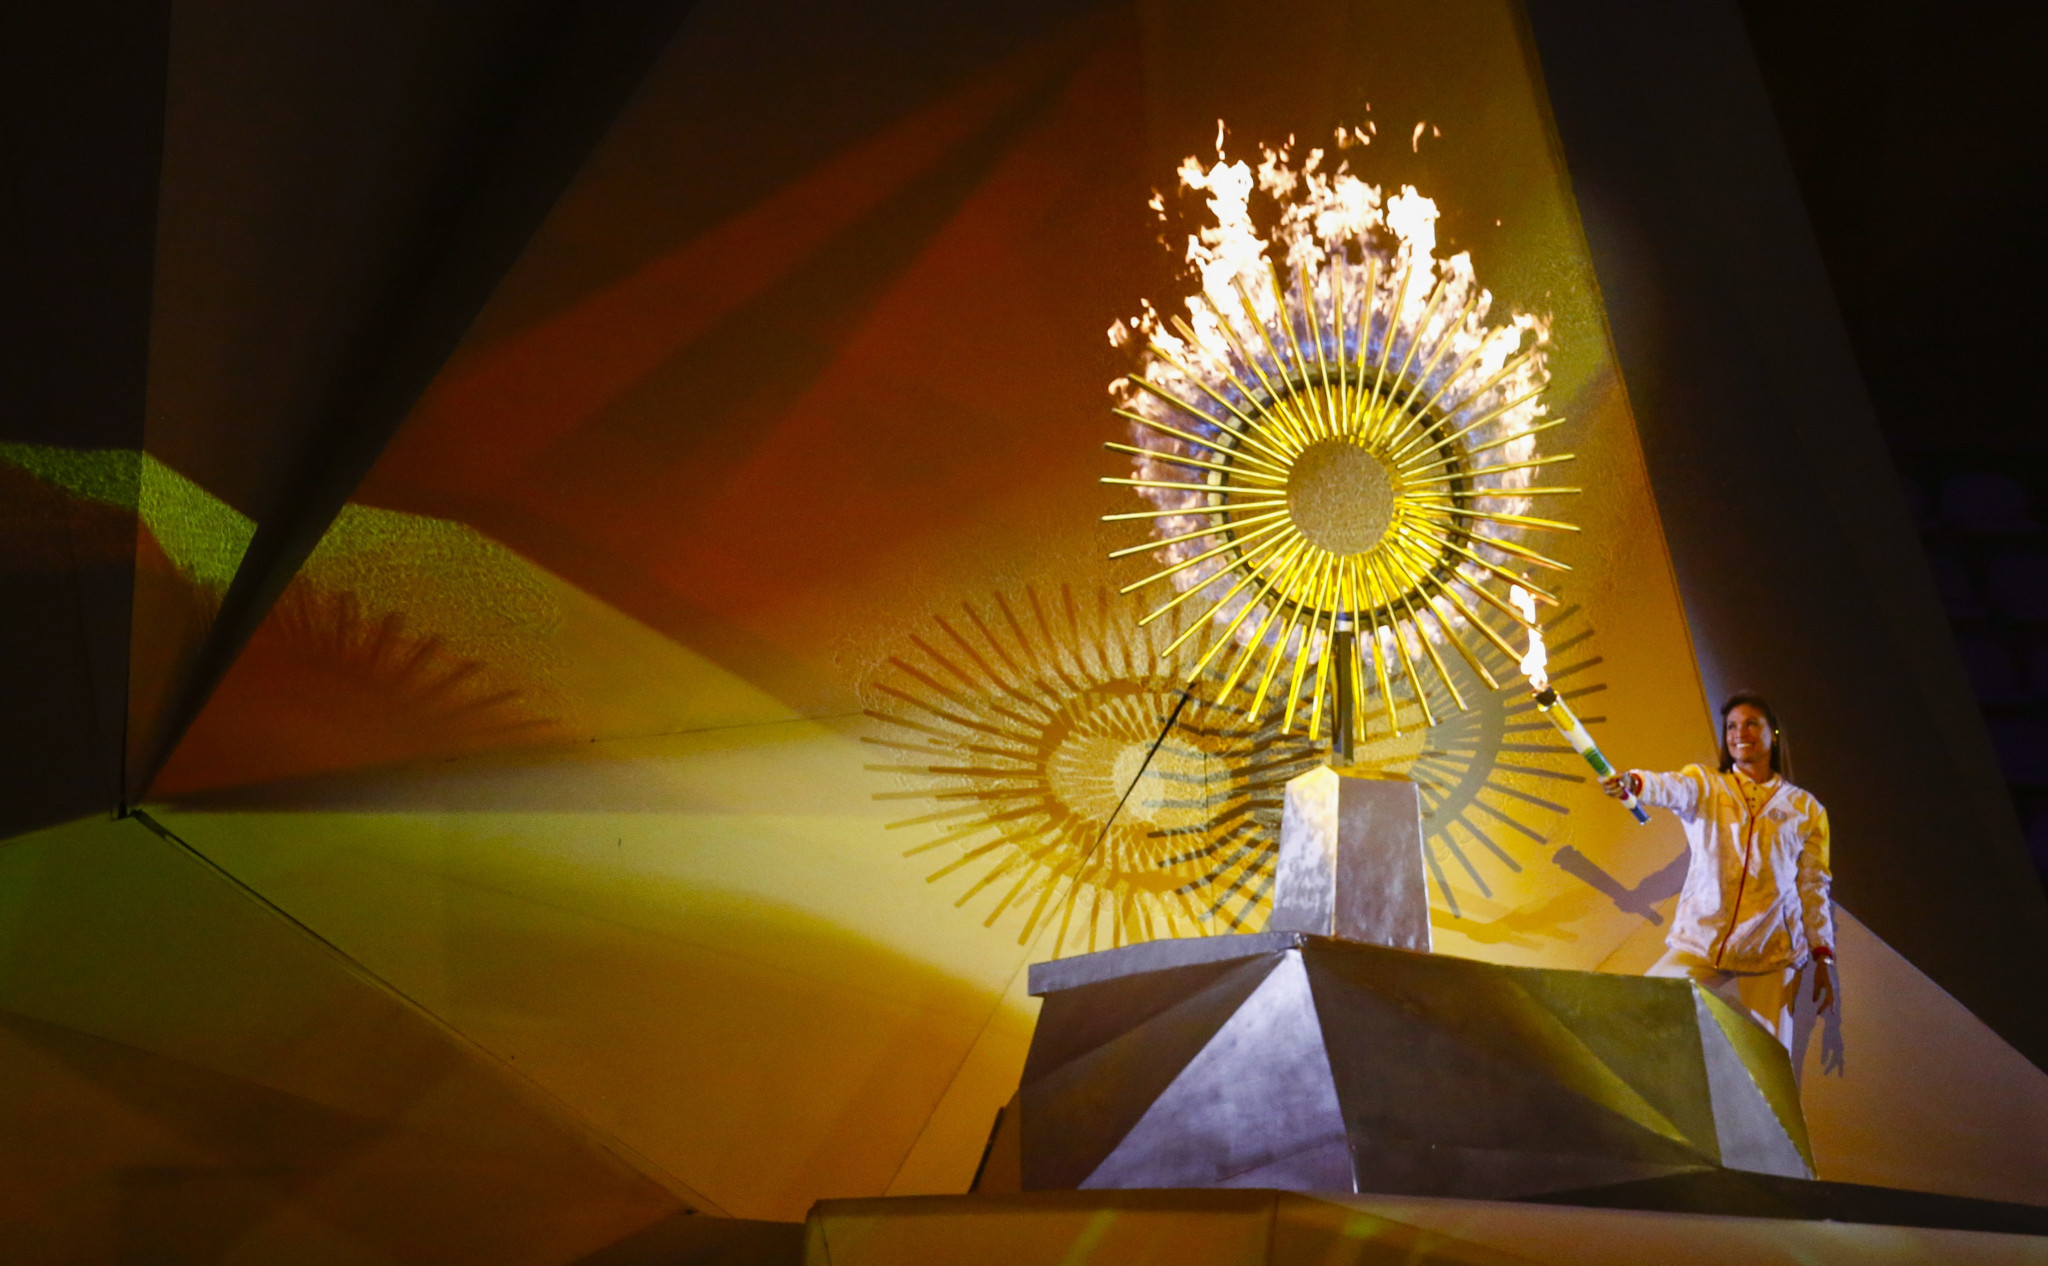 Colour and culture on show in Lima 2019 Opening Ceremony